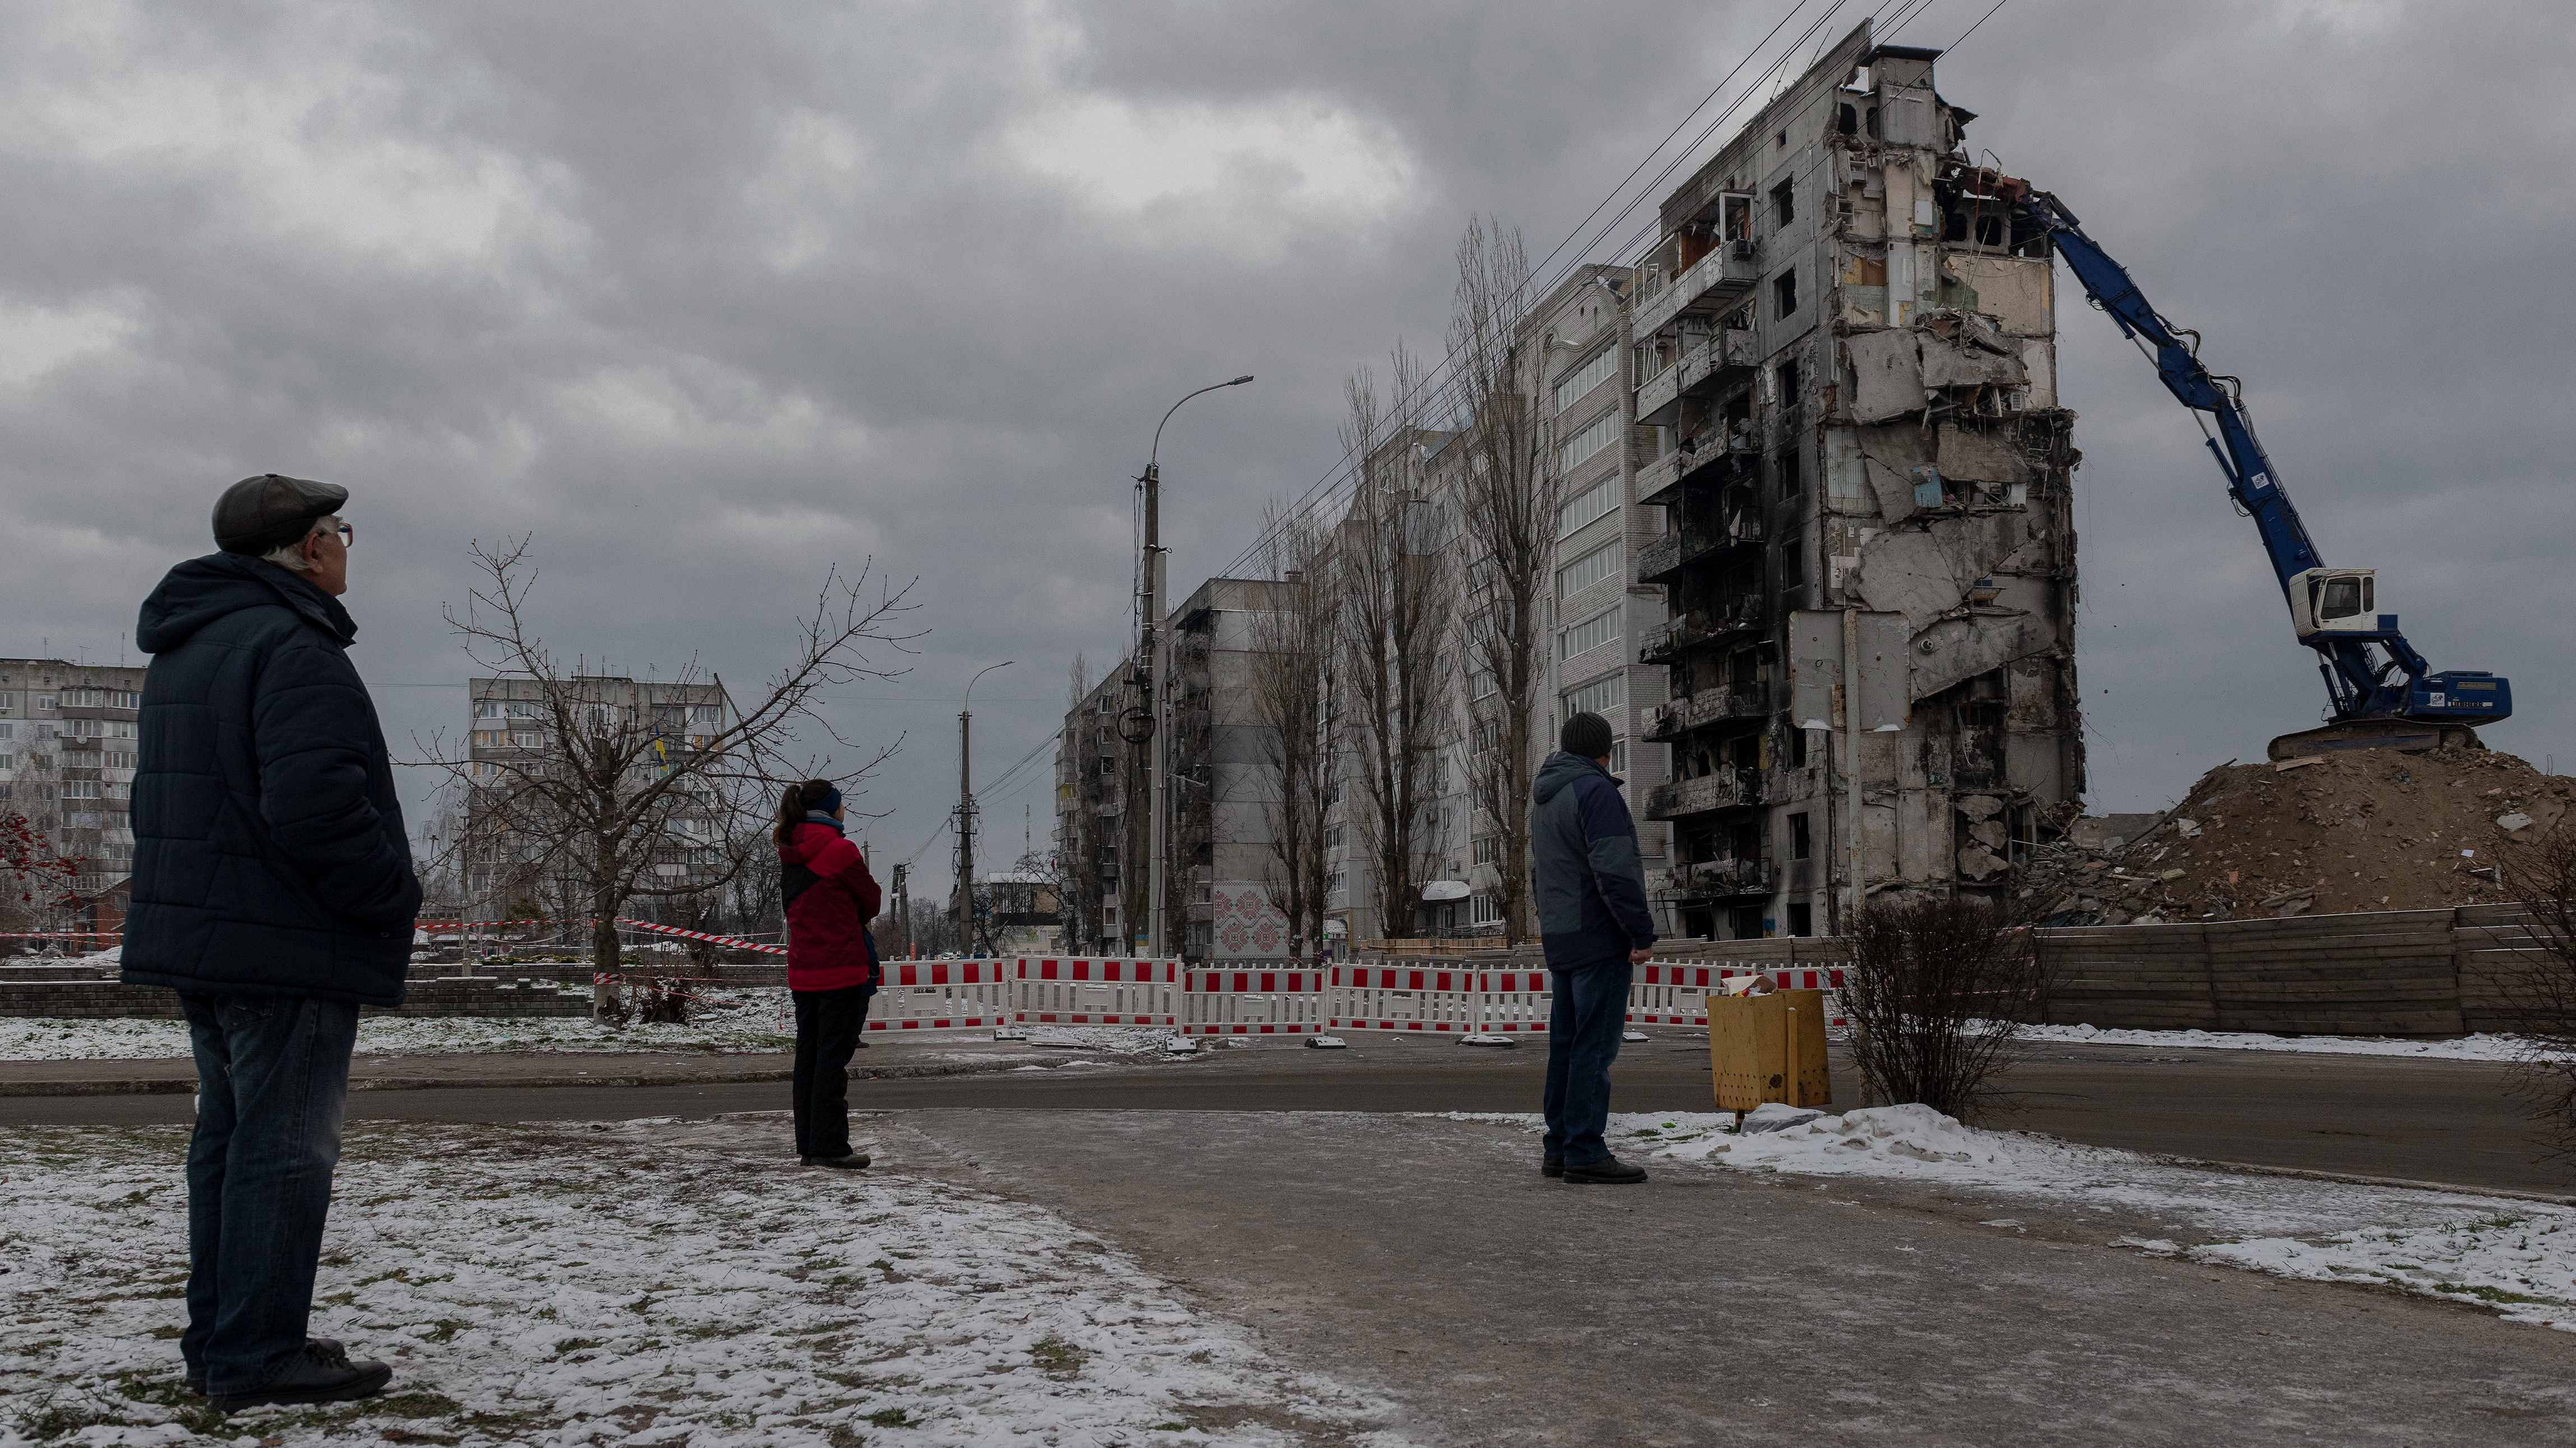 Local residents watch as a bombed building is dismantled in Borodyanka, Kyiv region, Ukraine. Credit: AP/PTI Photos